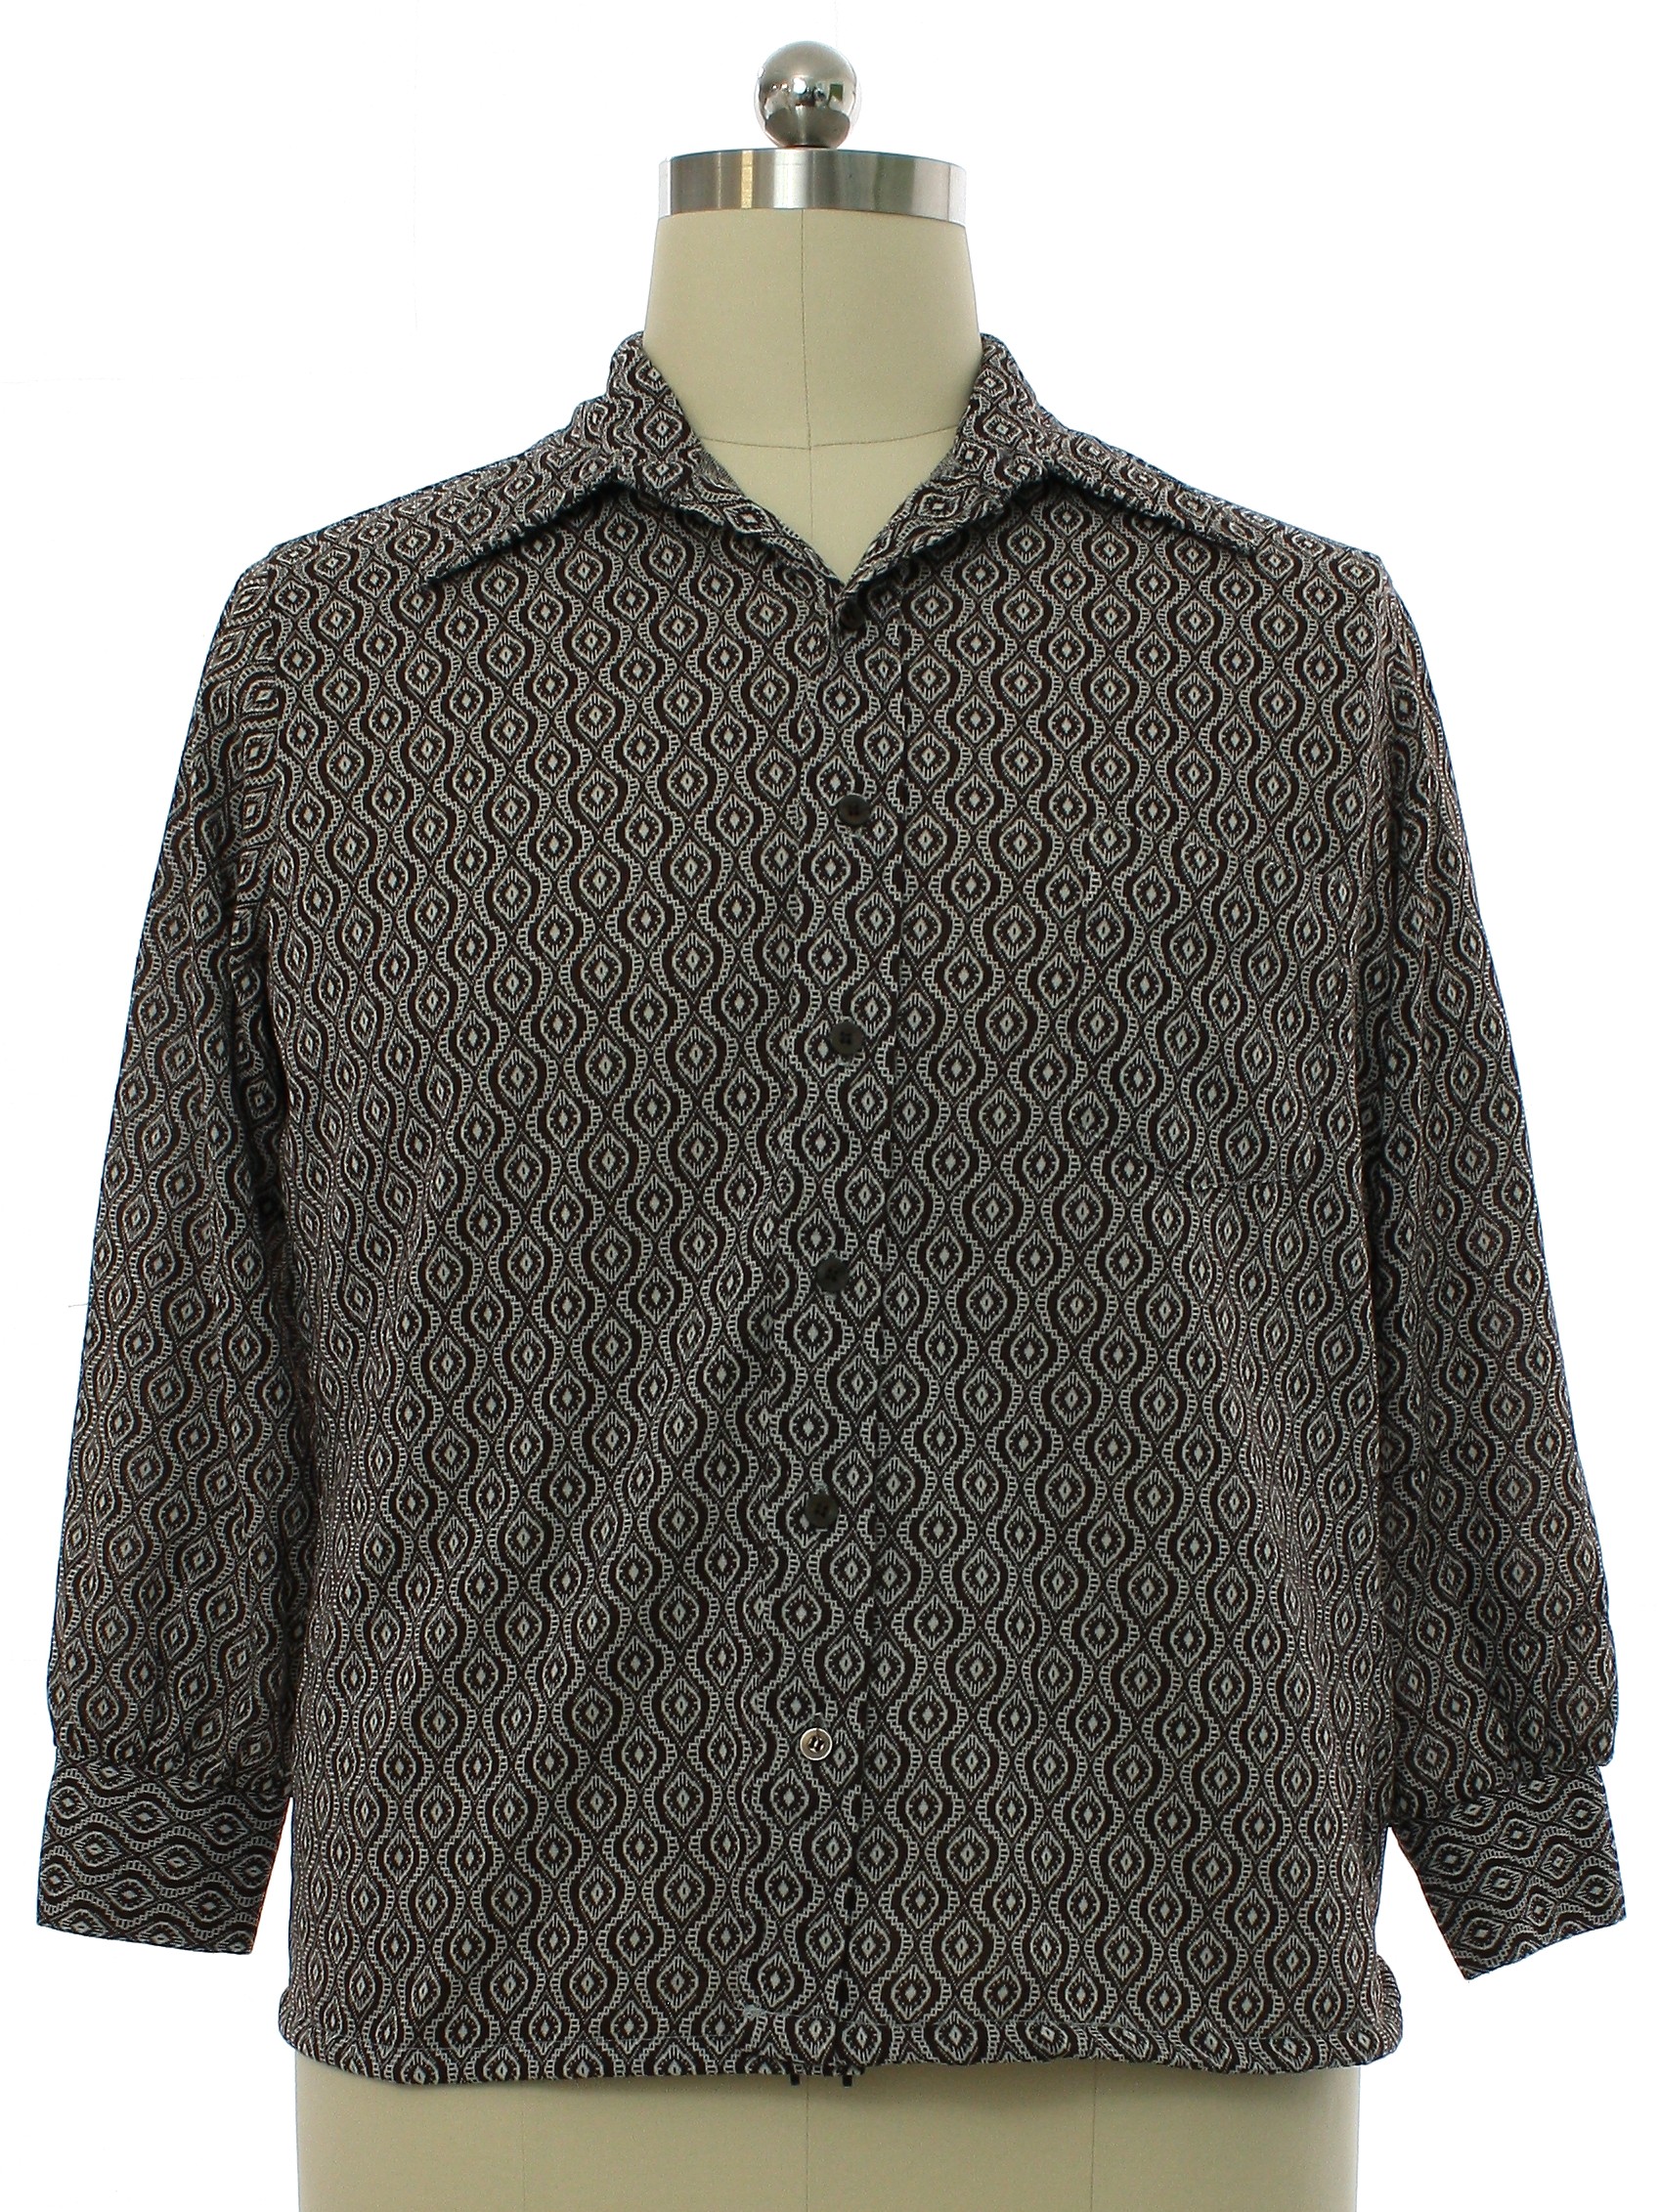 1960/70s Vintage - JCPENNEY / TOWNCRAFT - Mens Md. DISCO COLLAR Shirt